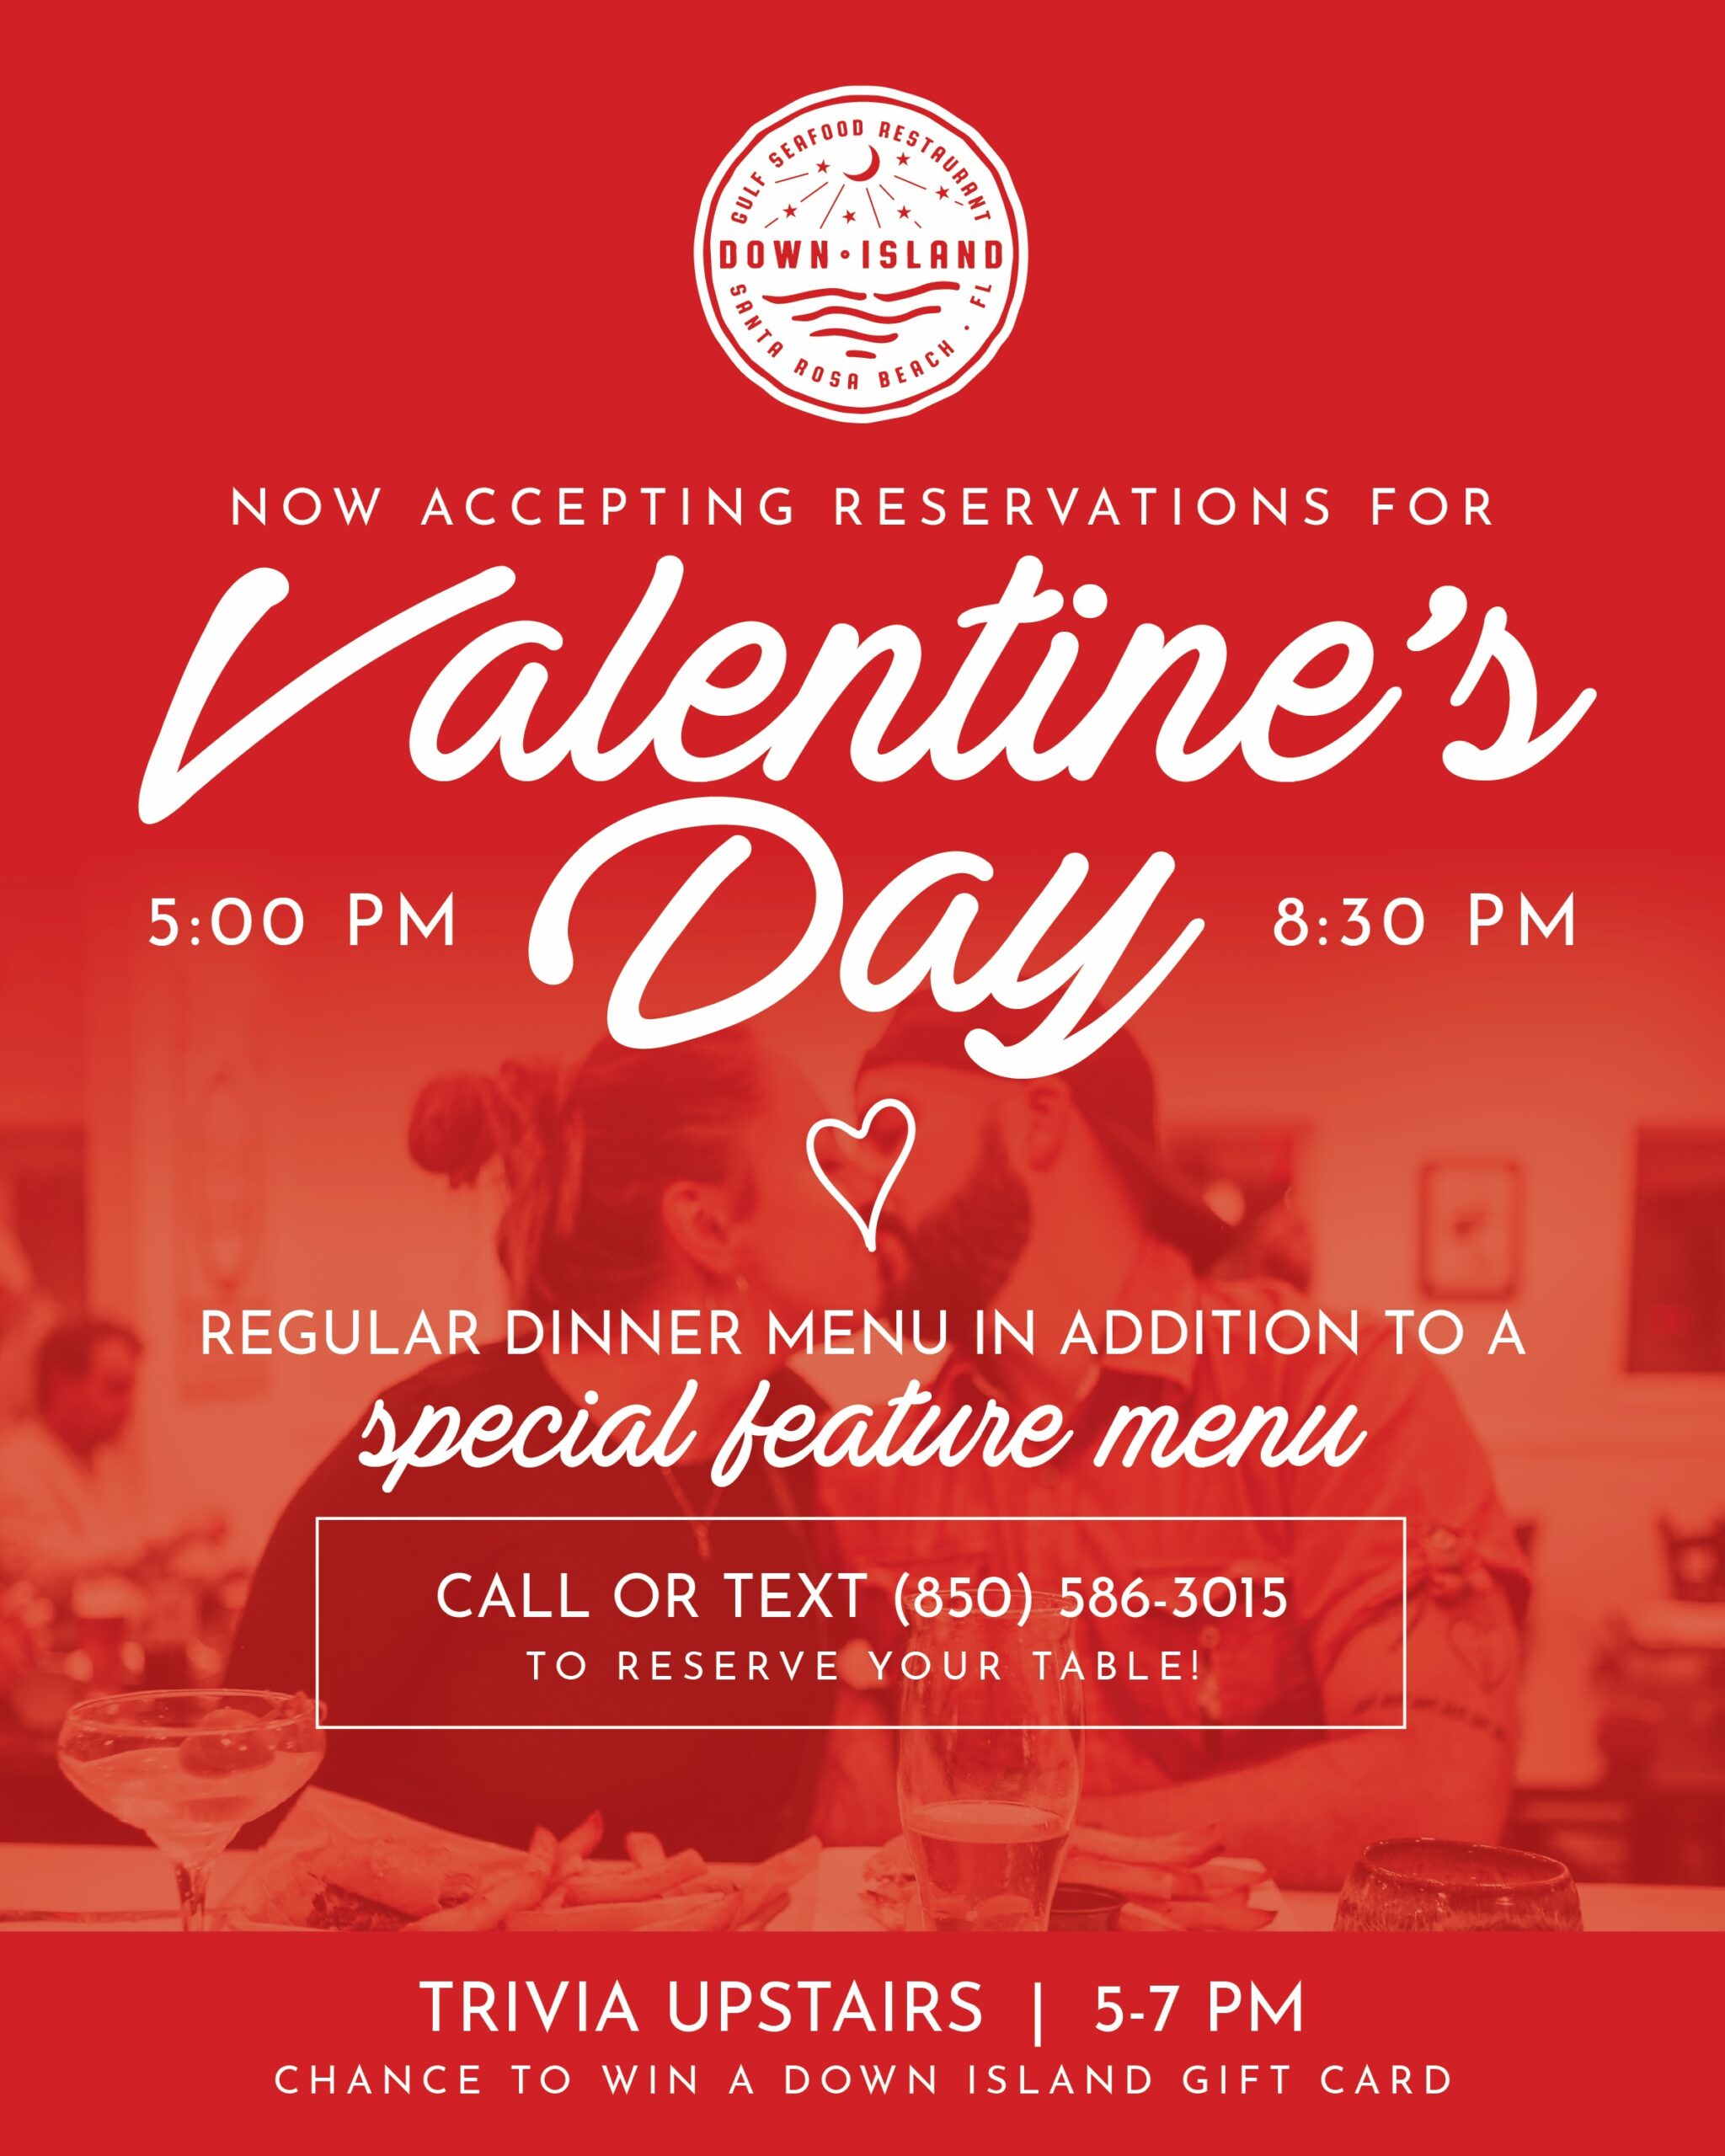 Down Island to Host Valentine’s Dinner with Optional Trivia